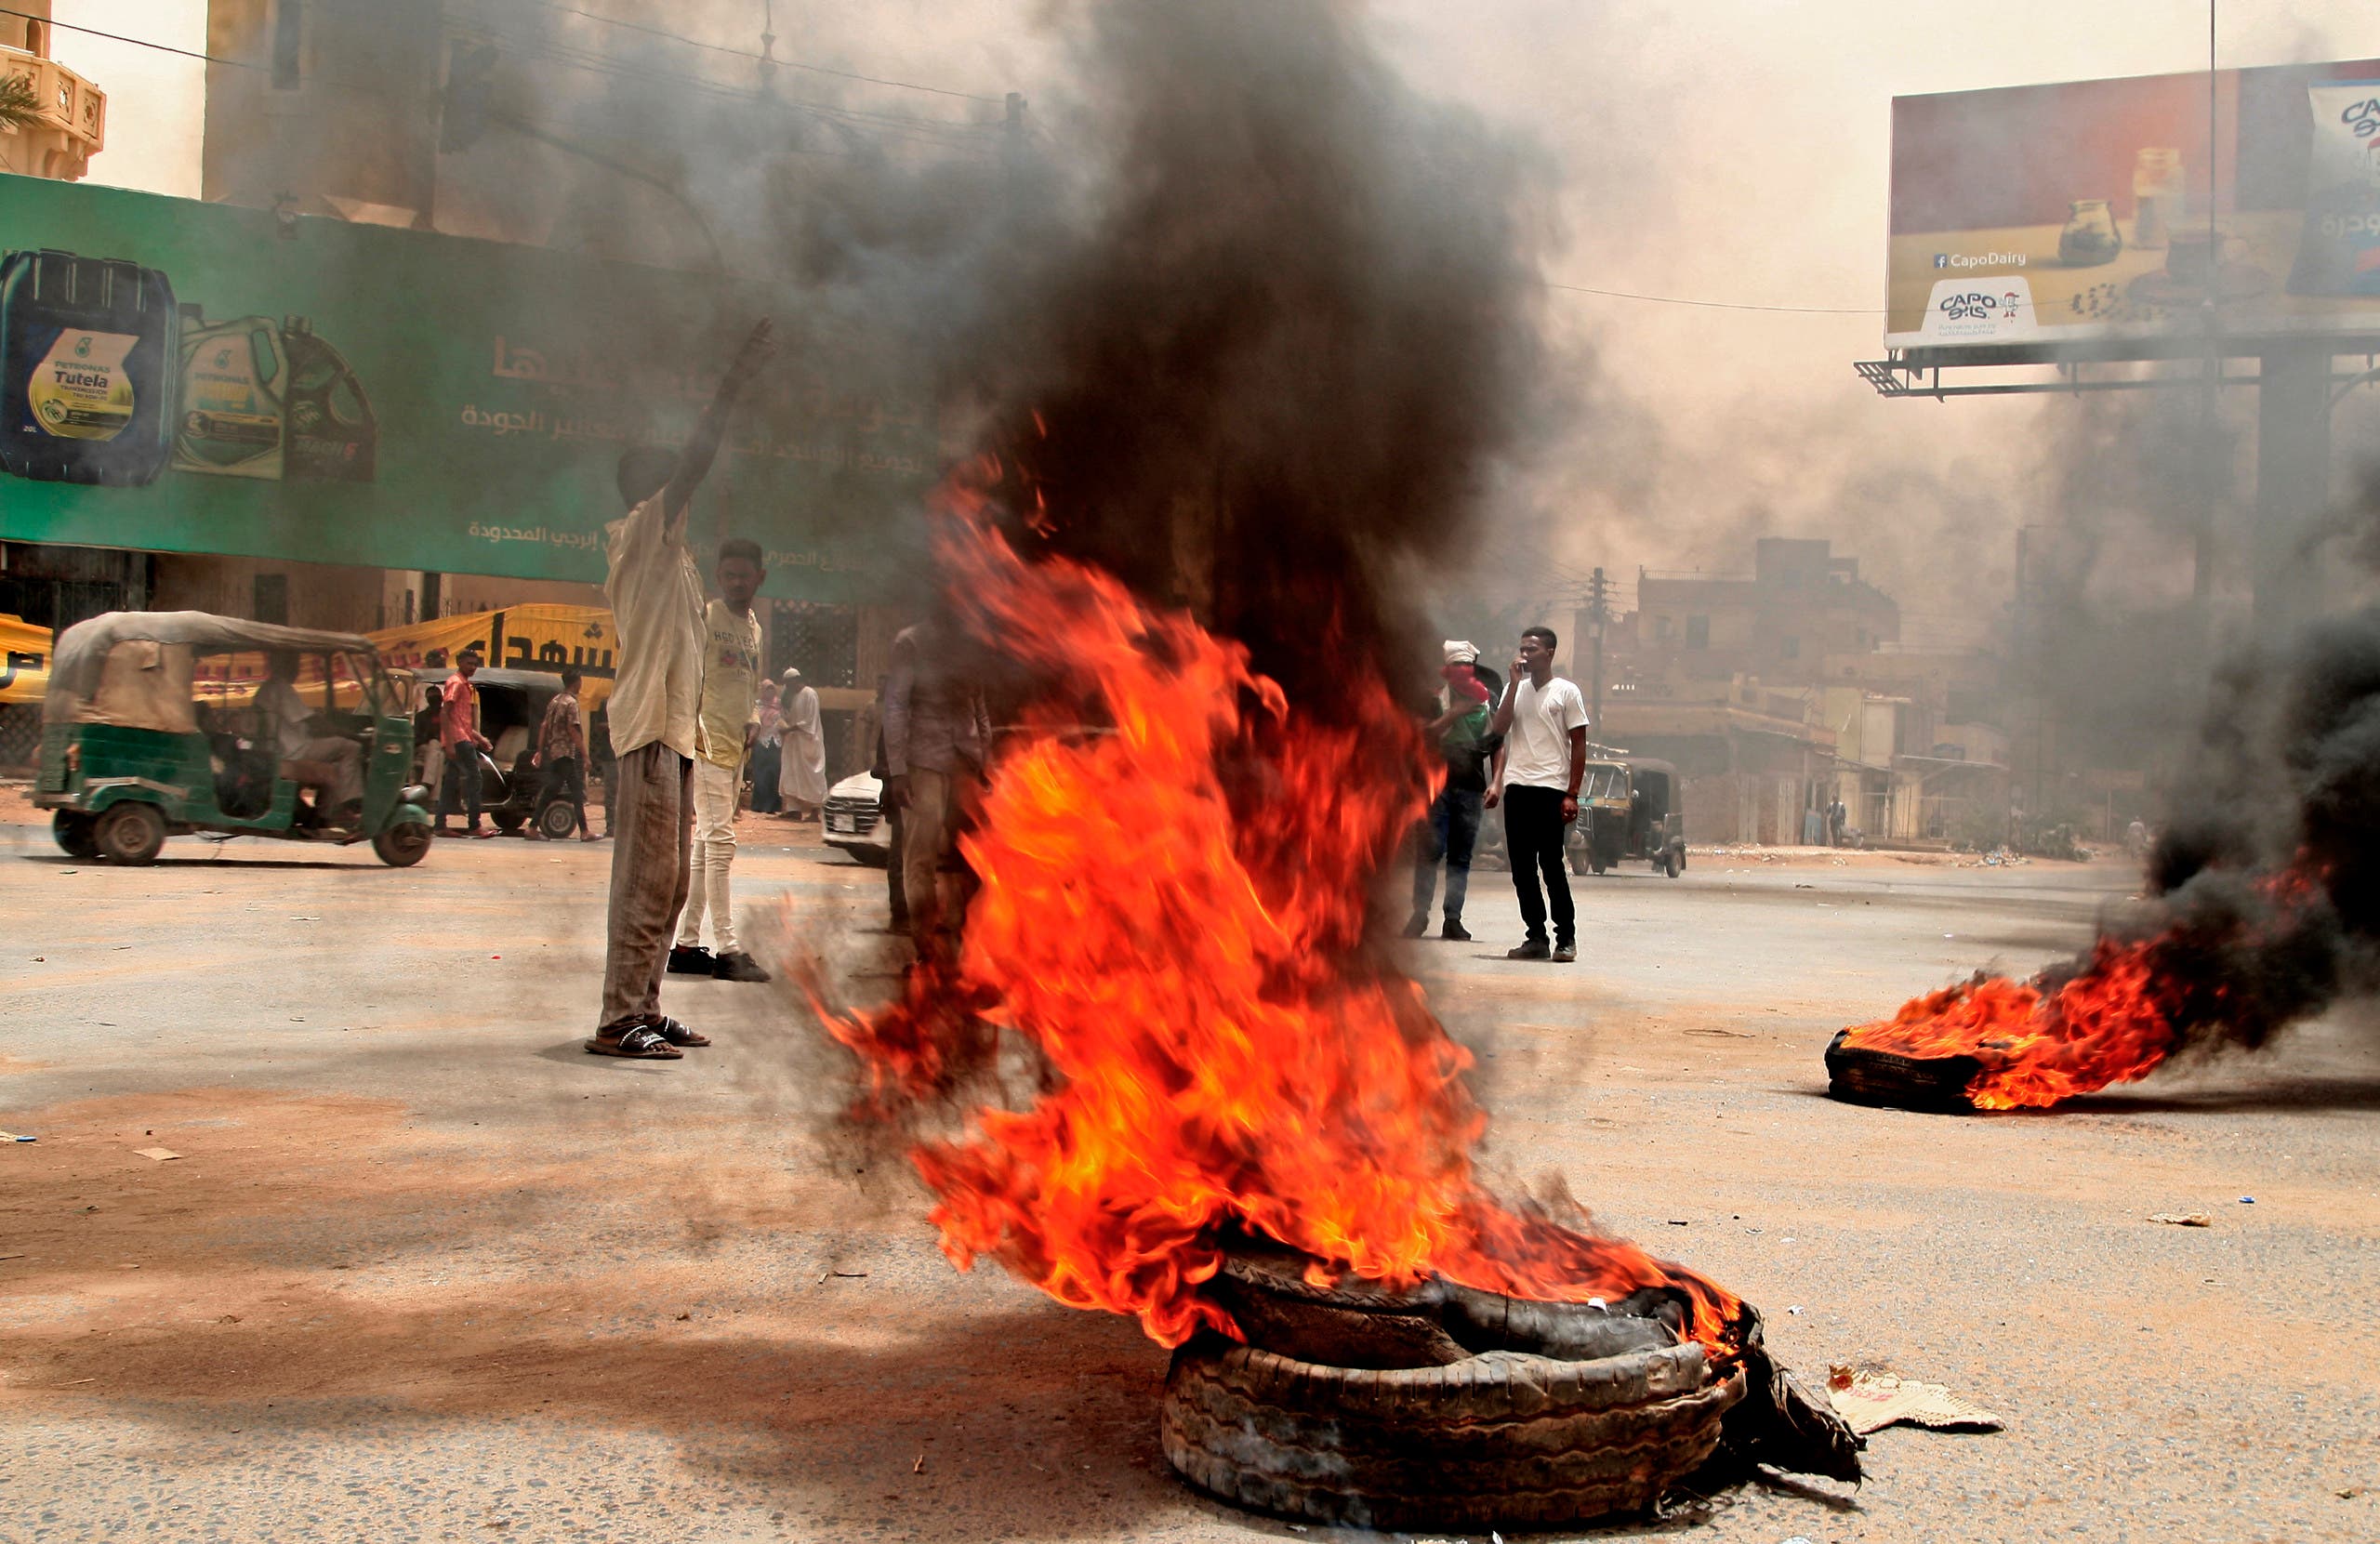 Sudanese protesters burn tires during a demonstration in Omdurman, the capital's twin city, urging the government to step down over delayed justice and recent harsh economic reforms, on June 30, 2021. (AFP)